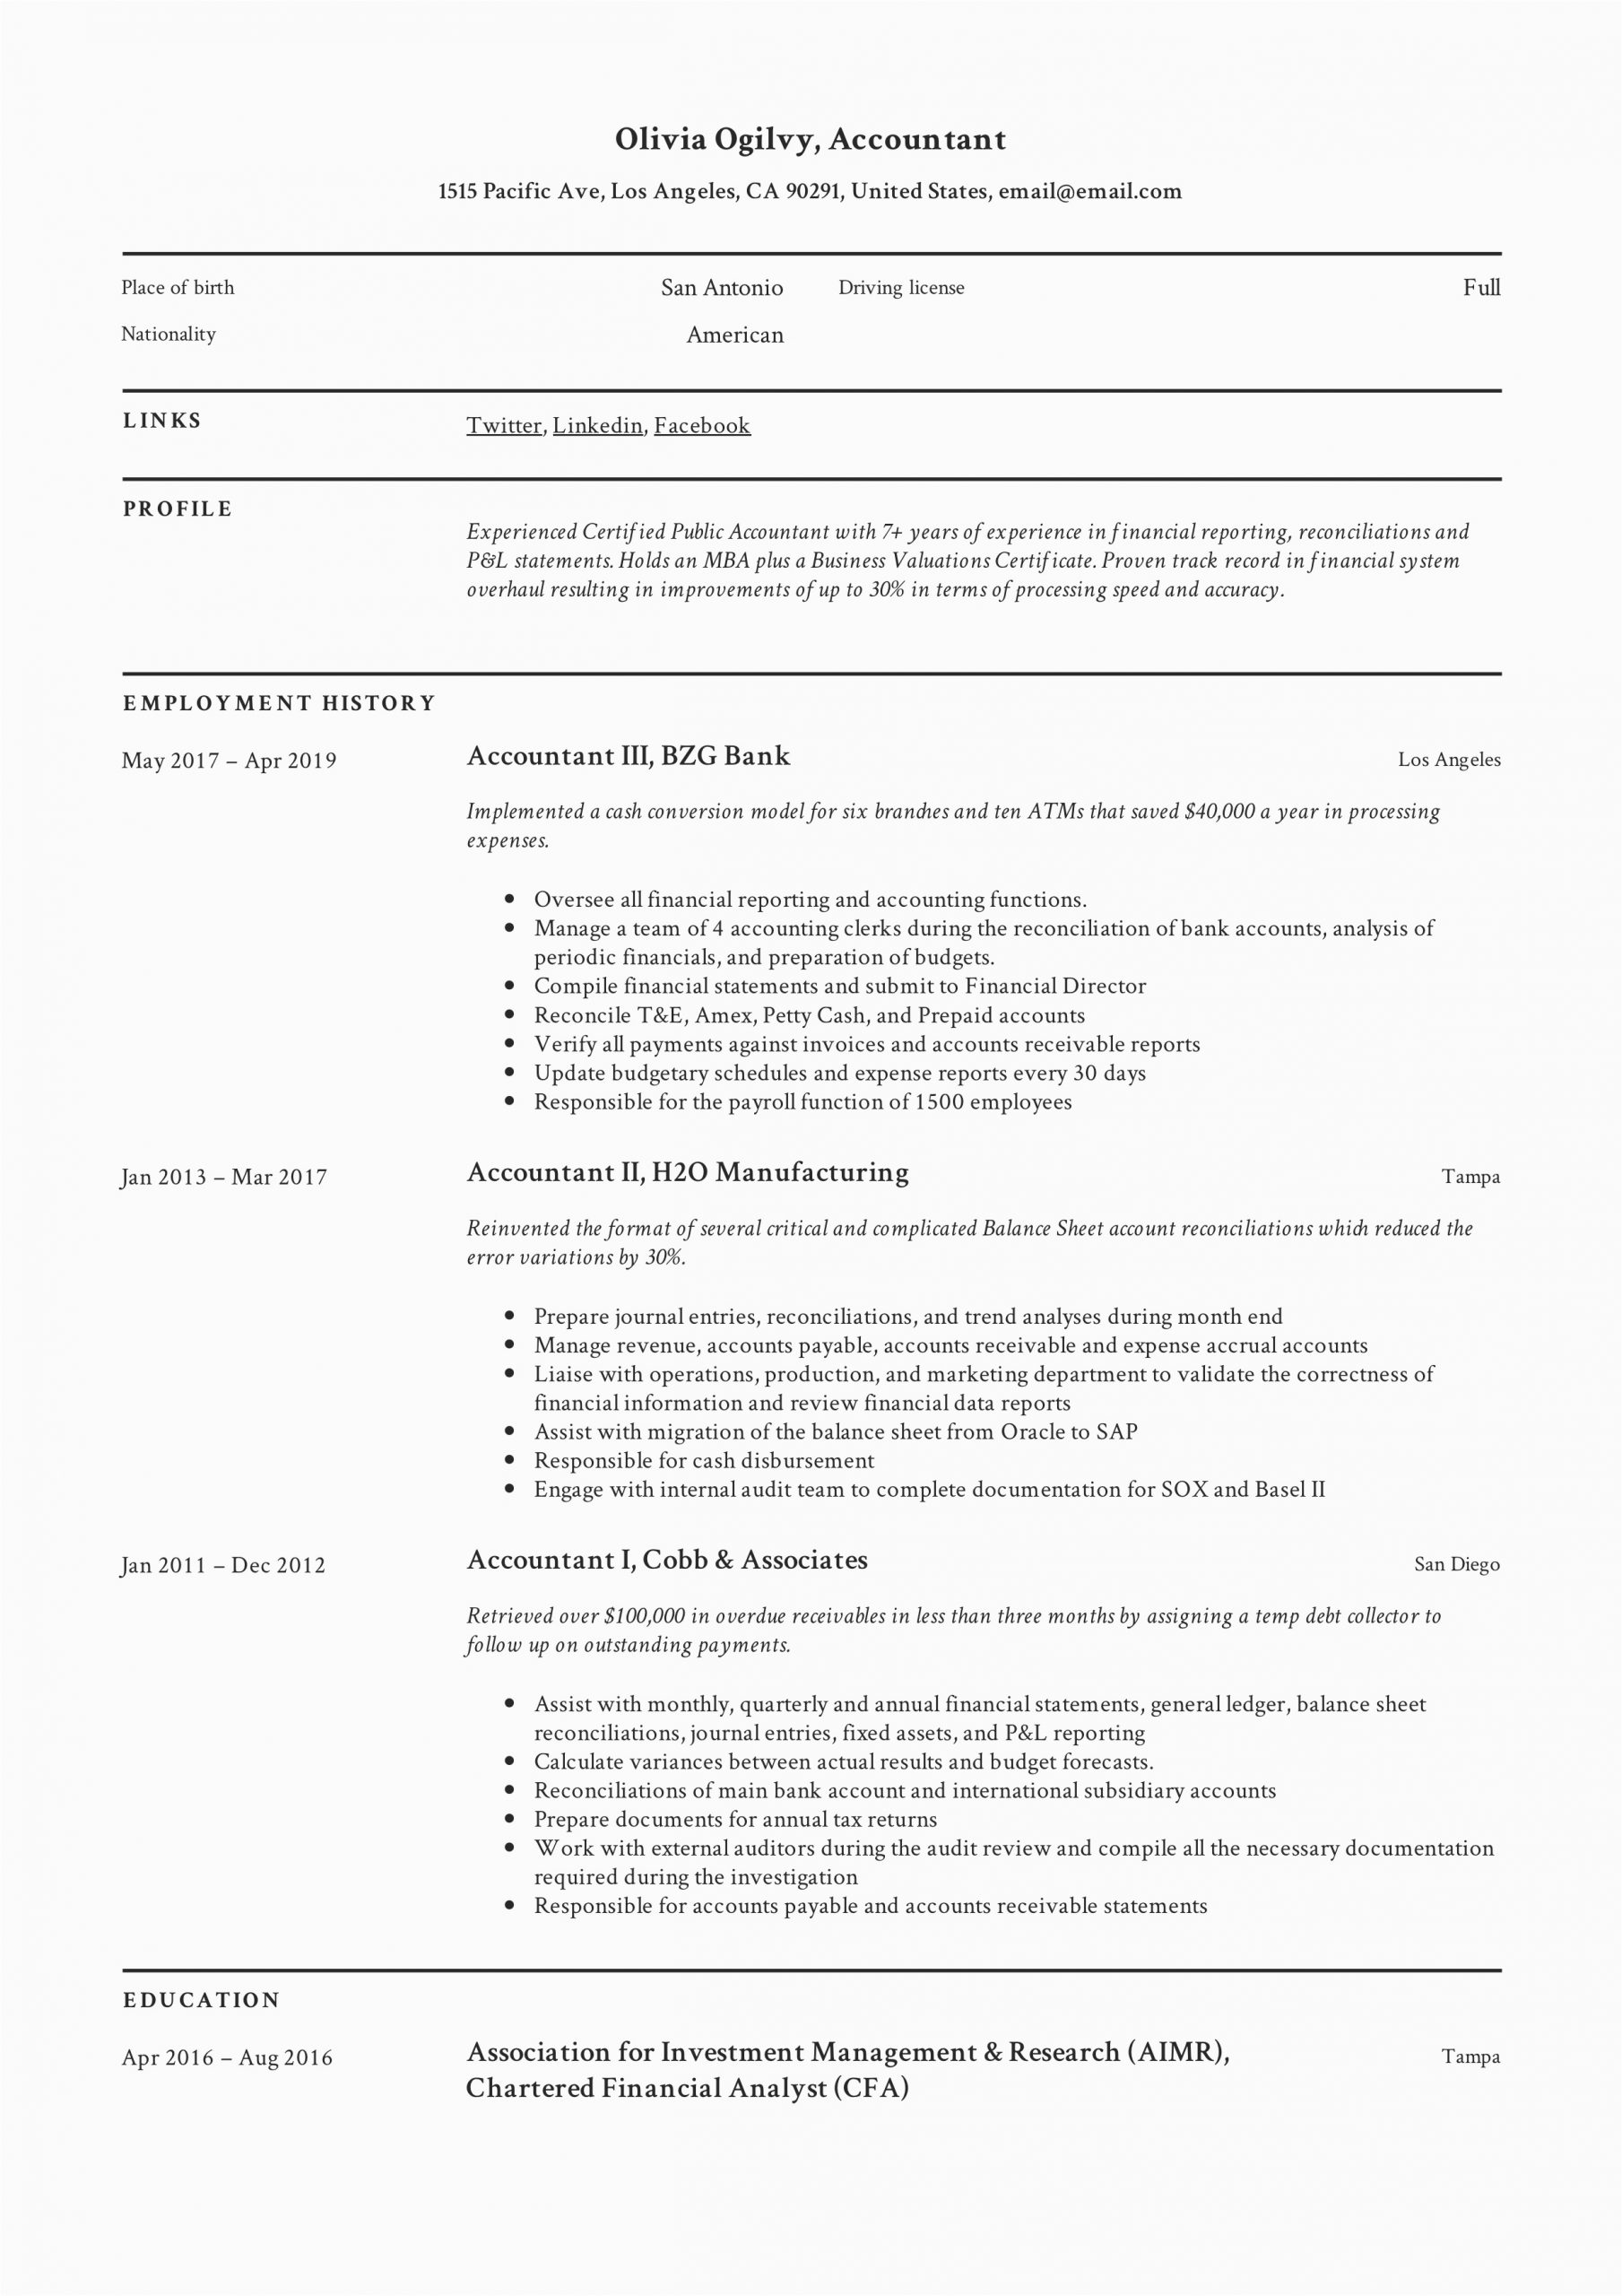 Sample Of Functional Resume for Accountant Accountant Resume & Writing Guide 12 Resume Templates